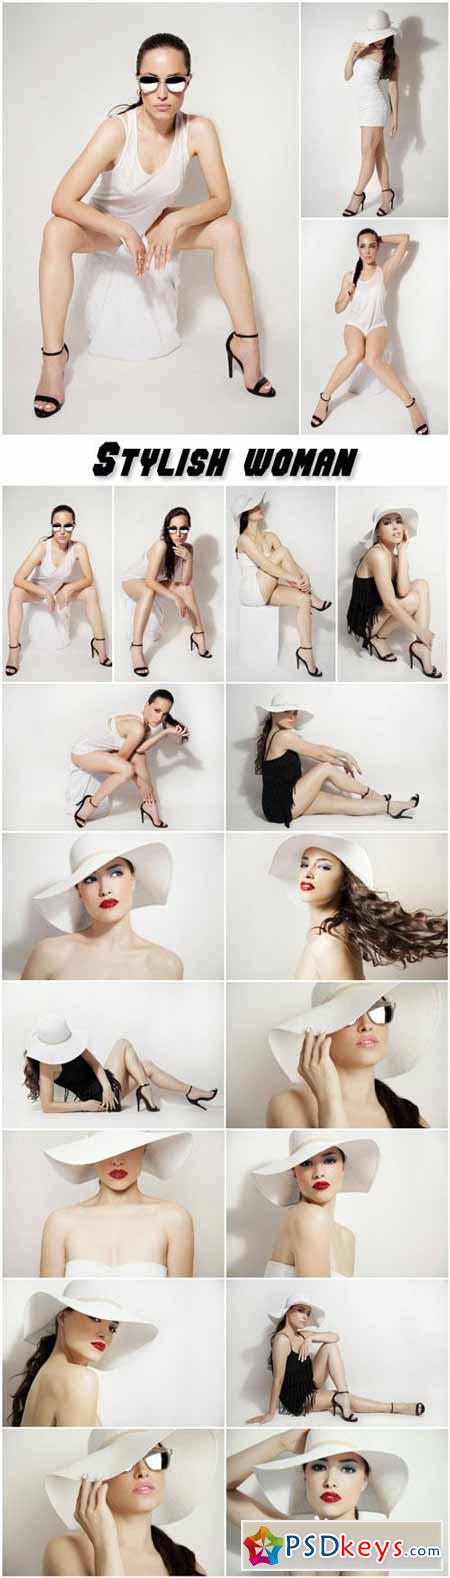 Stylish woman in a white hat